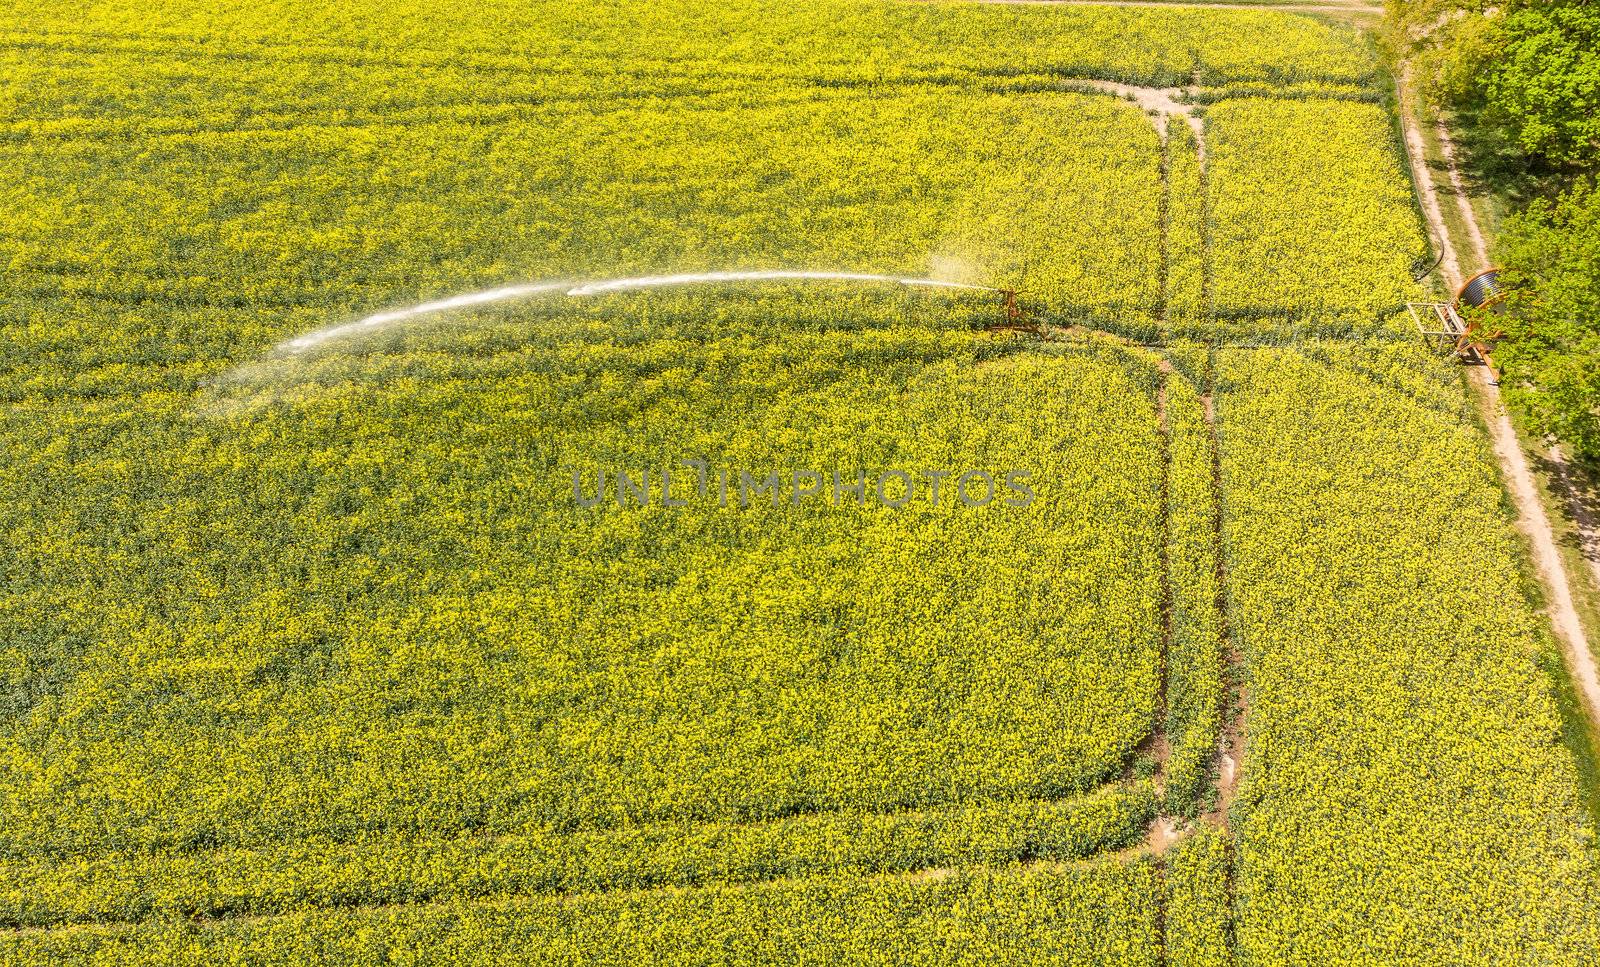 Aerial view of a yellow flowering field with rape and a sprinkler system for irrigation of the field by geogif